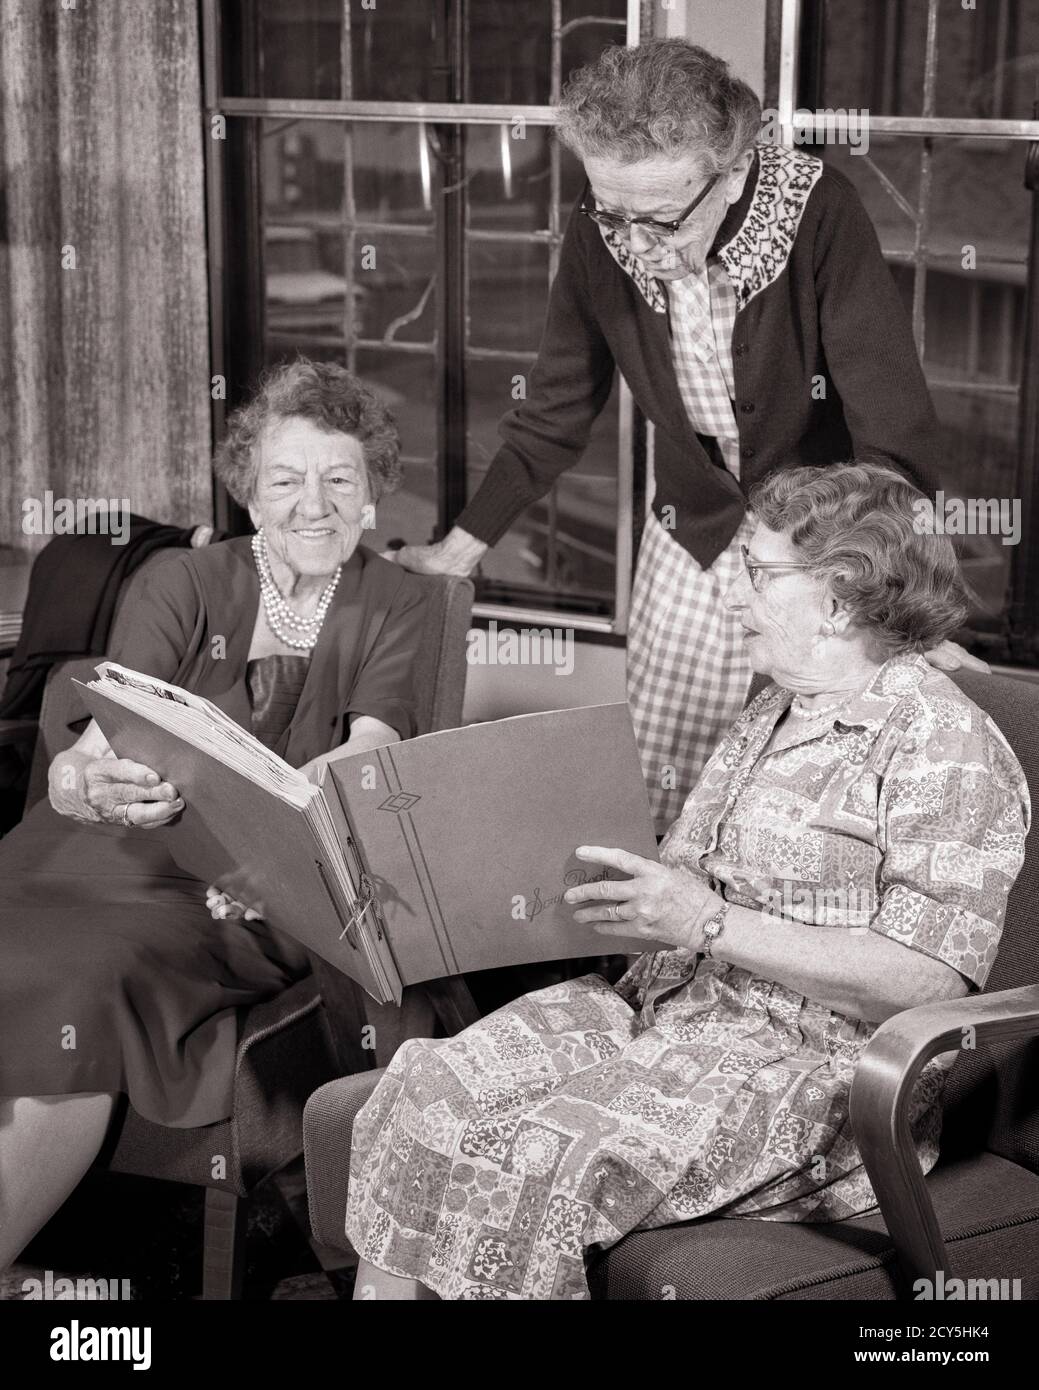 1960s THREE SENIOR WOMEN STANDING SITTING SIDE BY SIDE READING SHARING A MEMORY SCRAPBOOK PHOTO ALBUM IN RETIREMENT HOME - s15919 HAR001 HARS COMMUNICATION FRIEND PLEASED FAMILIES JOY LIFESTYLE MEMORY SATISFACTION ELDER FEMALES HOME LIFE SCRAPBOOK COPY SPACE FRIENDSHIP HALF-LENGTH LADIES PERSONS RETIREMENT SIBLINGS SISTERS SENIOR ADULT B&W SENIOR WOMAN RETIREE HAPPINESS OLD AGE OLDSTERS CHEERFUL OLDSTER LEISURE AGING EXCITEMENT REMEMBER PRIDE A IN SIBLING SMILES ELDERS CONNECTION CONCEPTUAL FRIENDLY JOYFUL AGISM COOPERATION ELDERLY WOMAN MEMORIES SIDE BY SIDE TOGETHERNESS BLACK AND WHITE Stock Photo